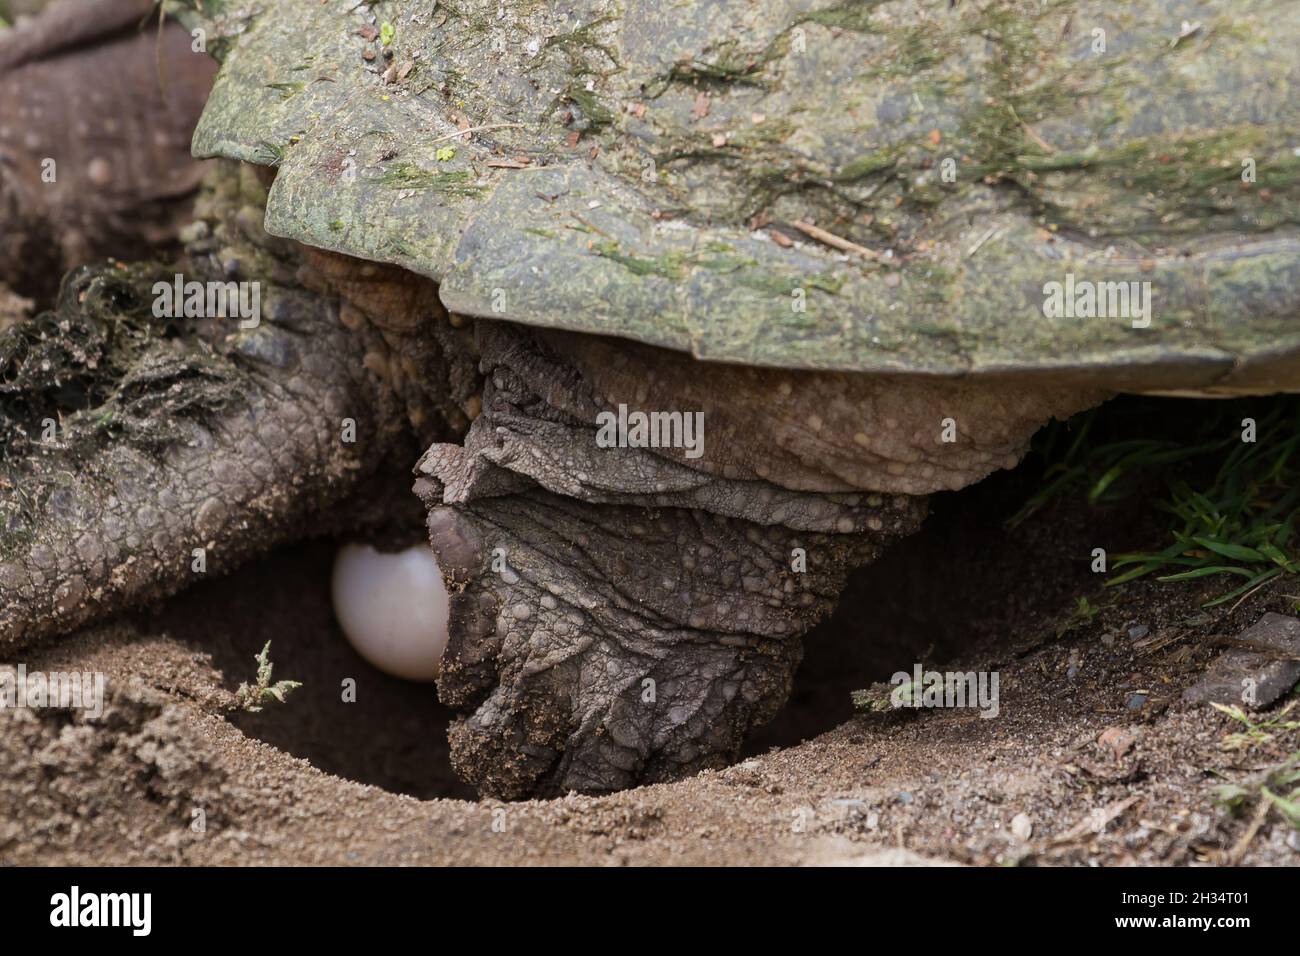 A large snapping turtle laying eggs in a nest at the side of a gravel road. Stock Photo